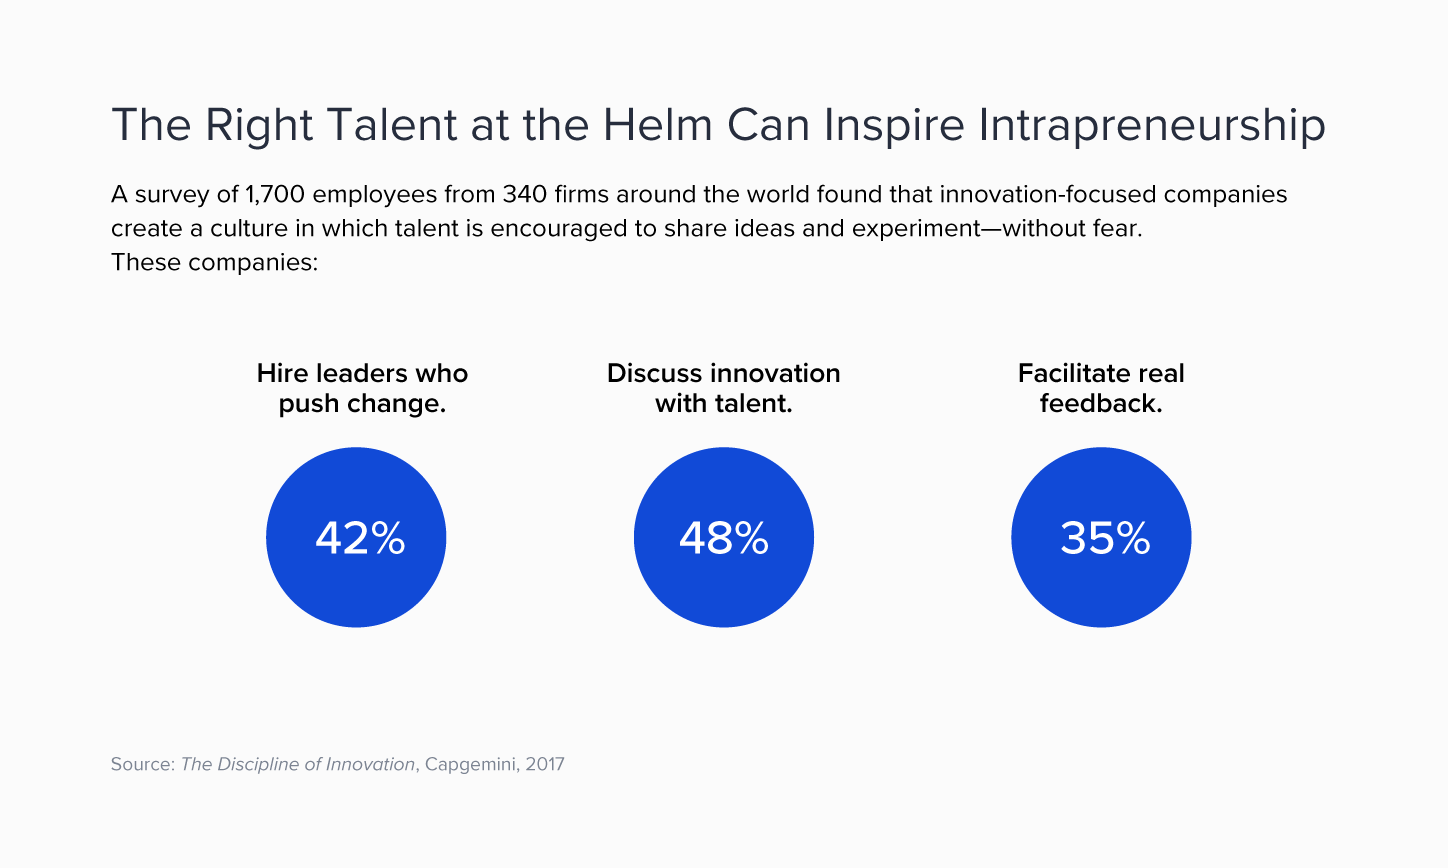 42% of innovative organizations hire open-minded leaders, 48% discuss innovation with talent, and 35% facilitate real feedback. 